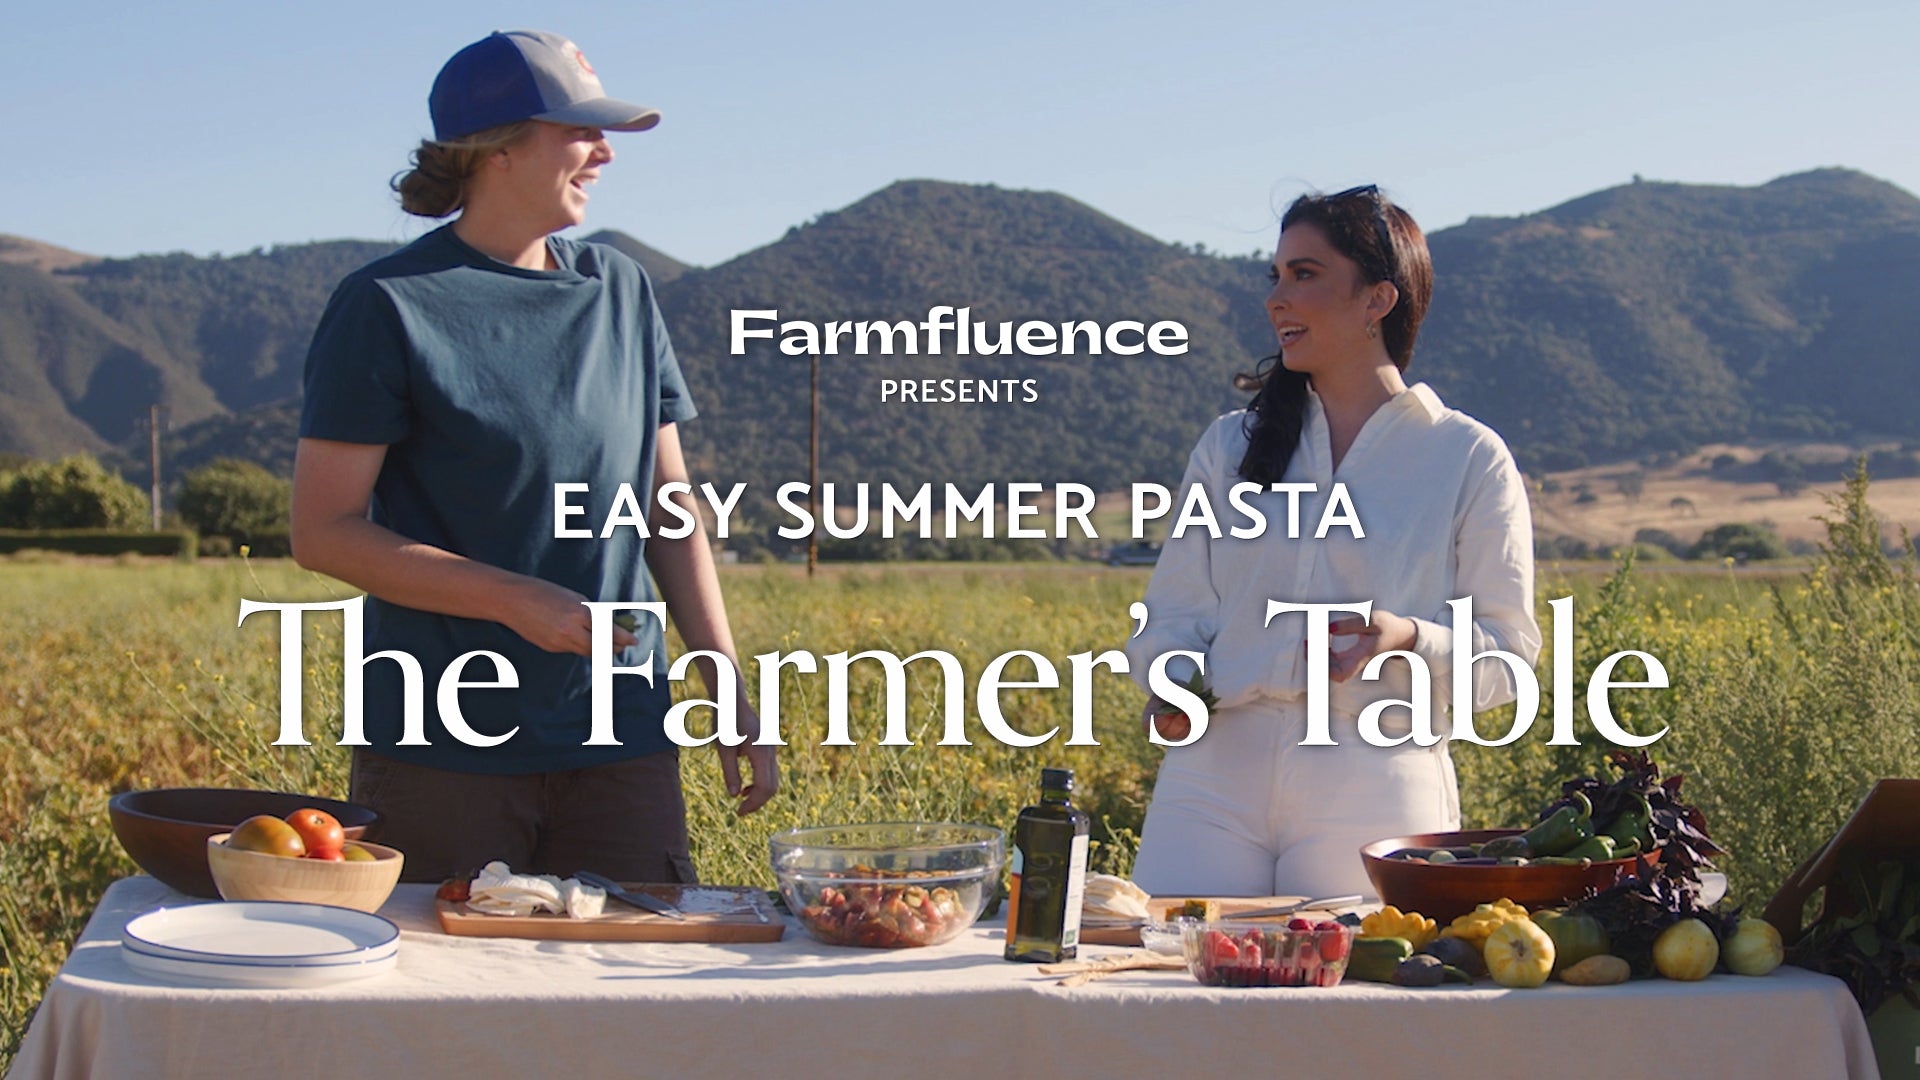 How to make the easiest summer pasta recipe. Join us at the farm!